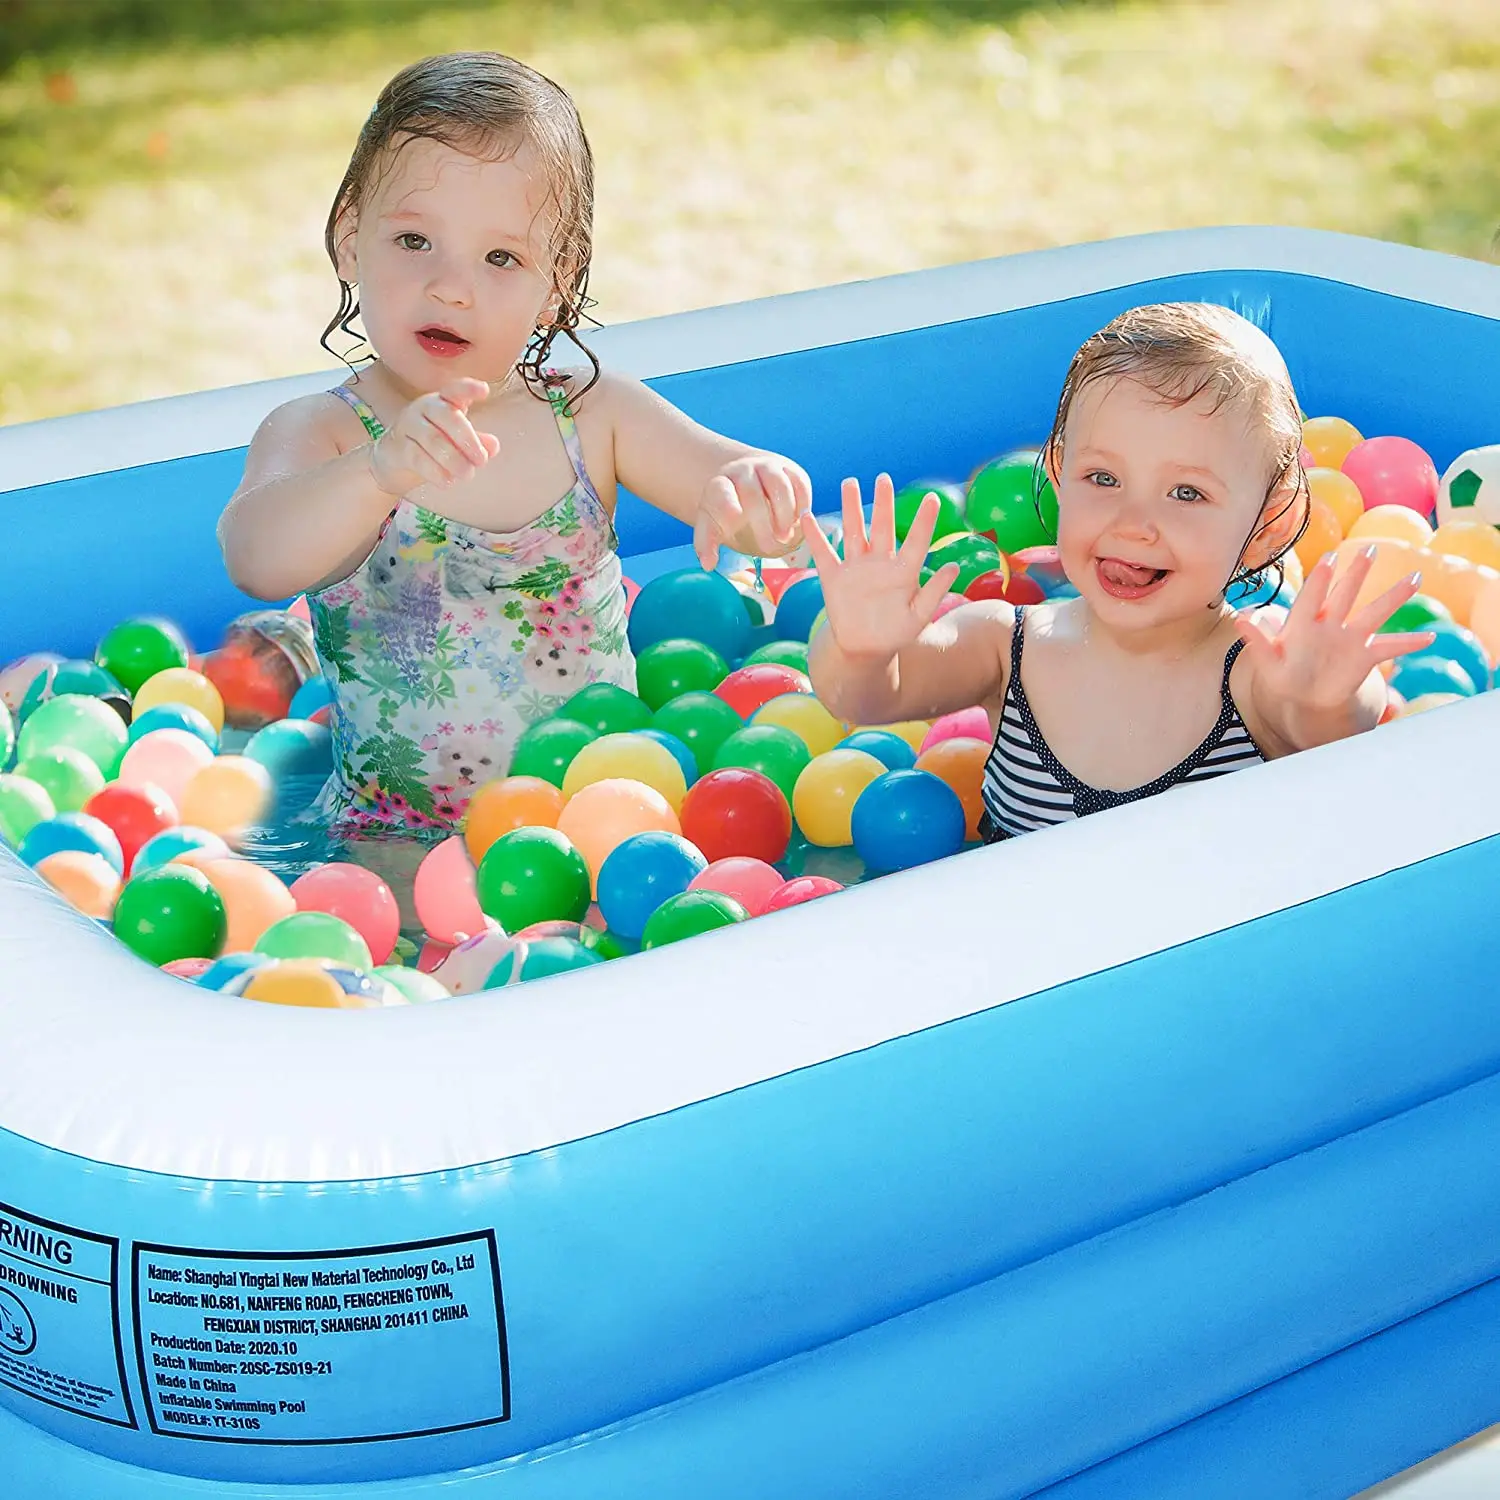 

Outdoor Inflatable Swimming Pool Full-Sized Above Ground Kiddle Family Lounge Pool for Adult Kids Toddlers Blue180x125x60cm